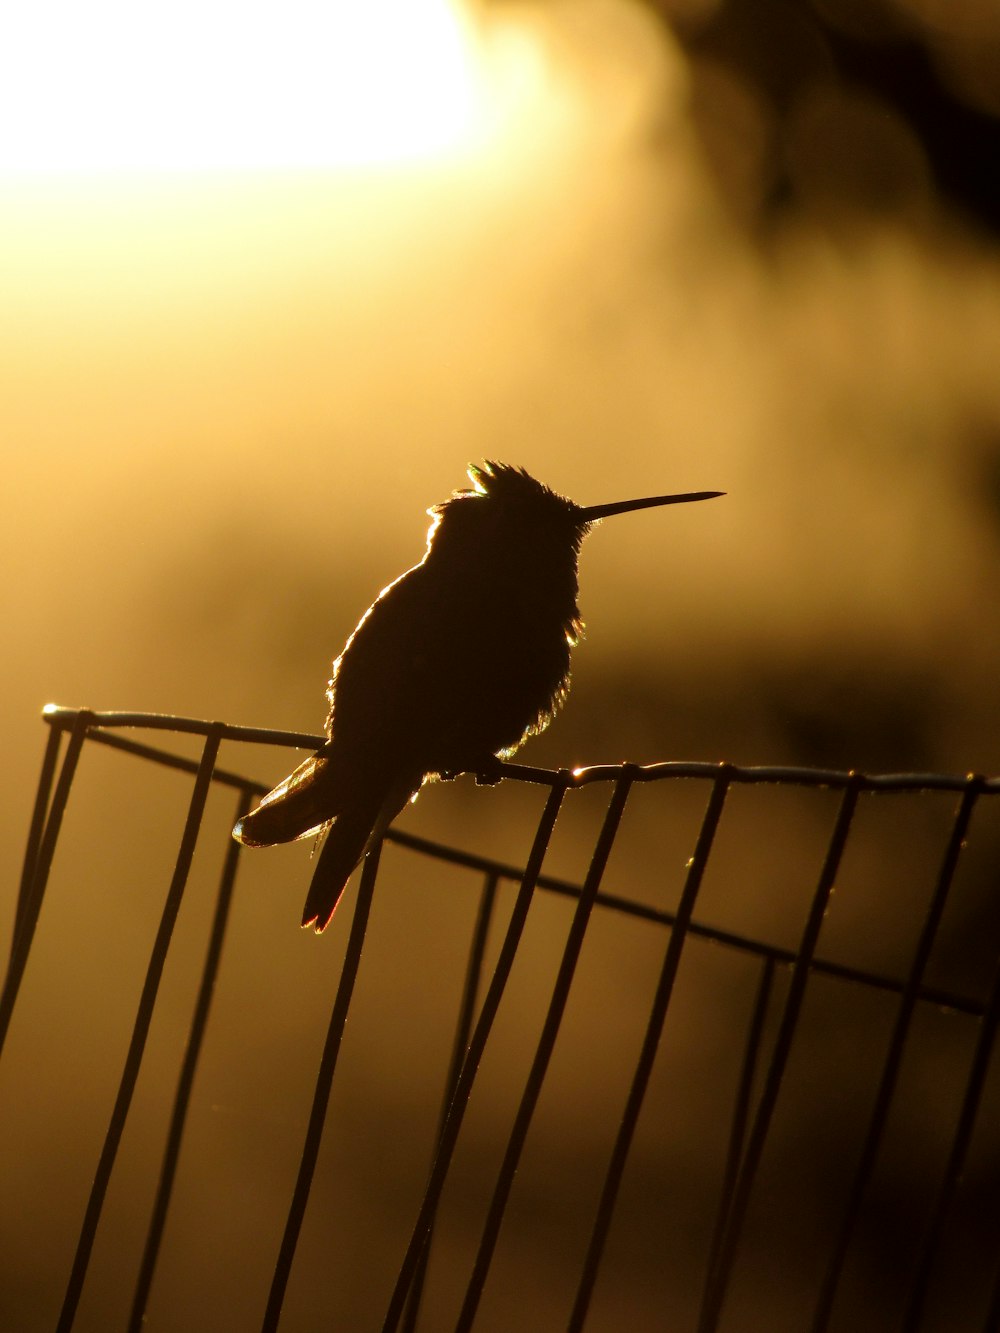 silhouette of bird on fence during sunset